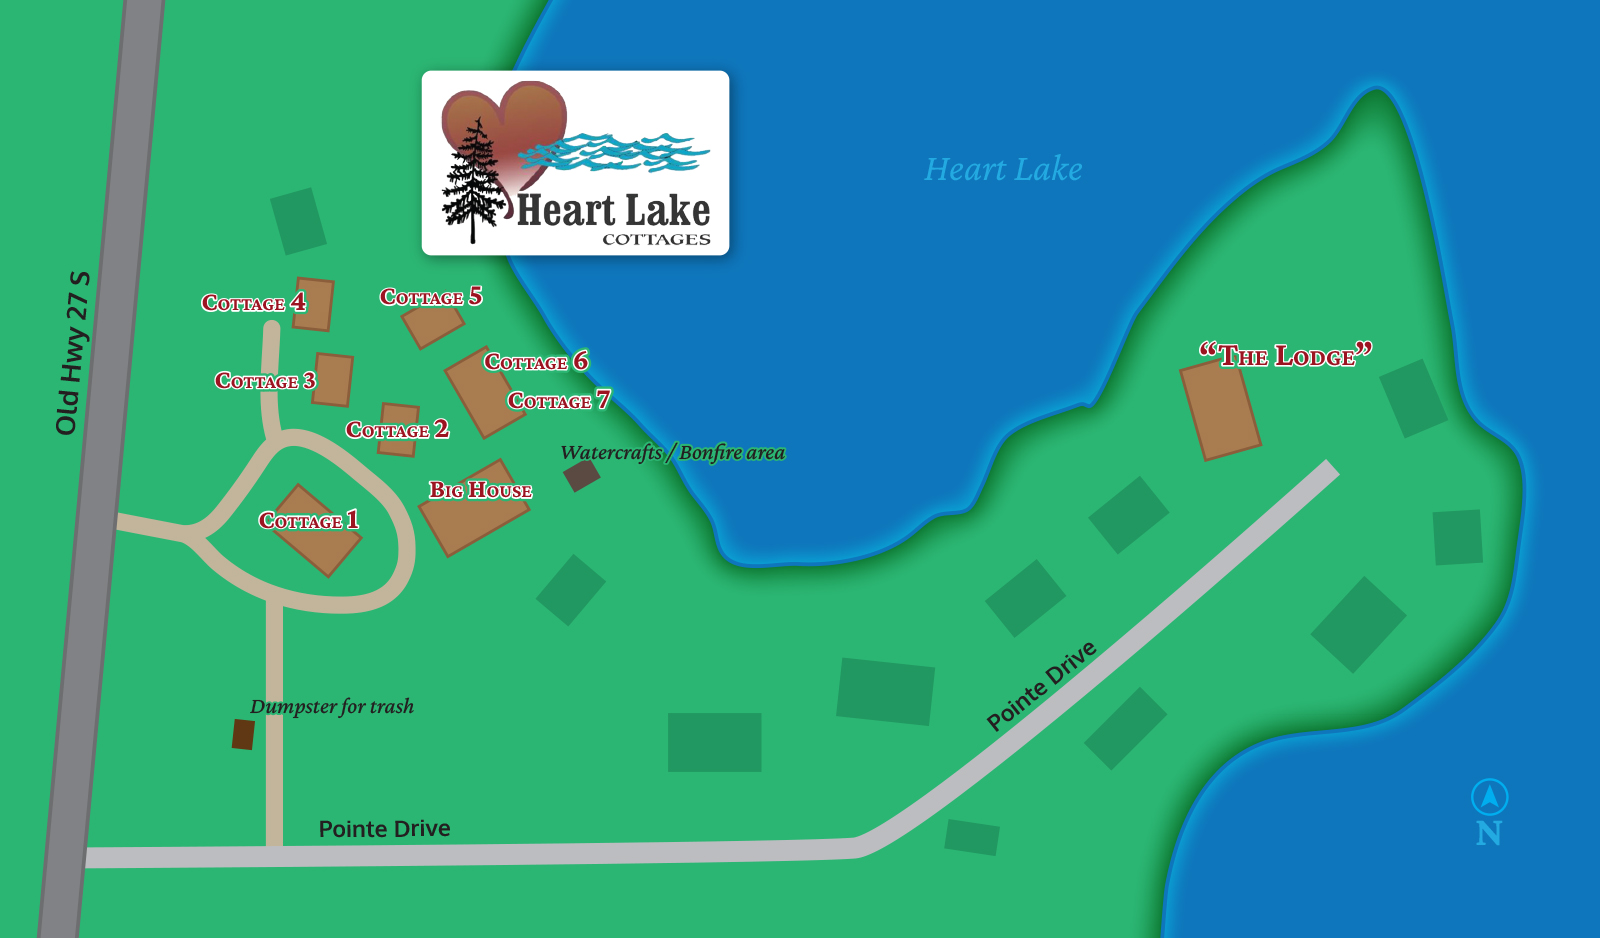 Heart Lake Cottages map